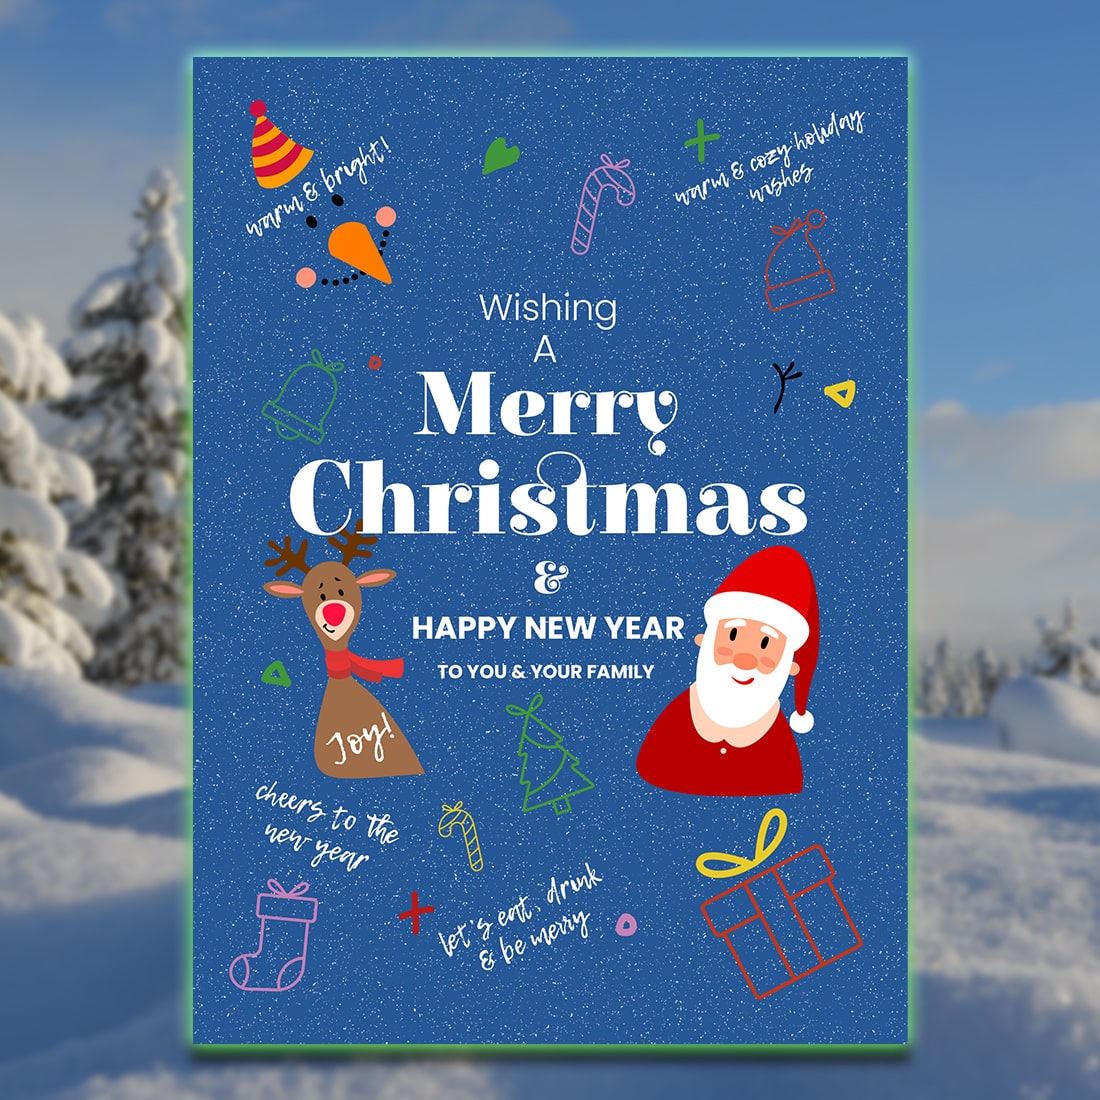 Printable Christmas and New Year Cards PSD preview image.